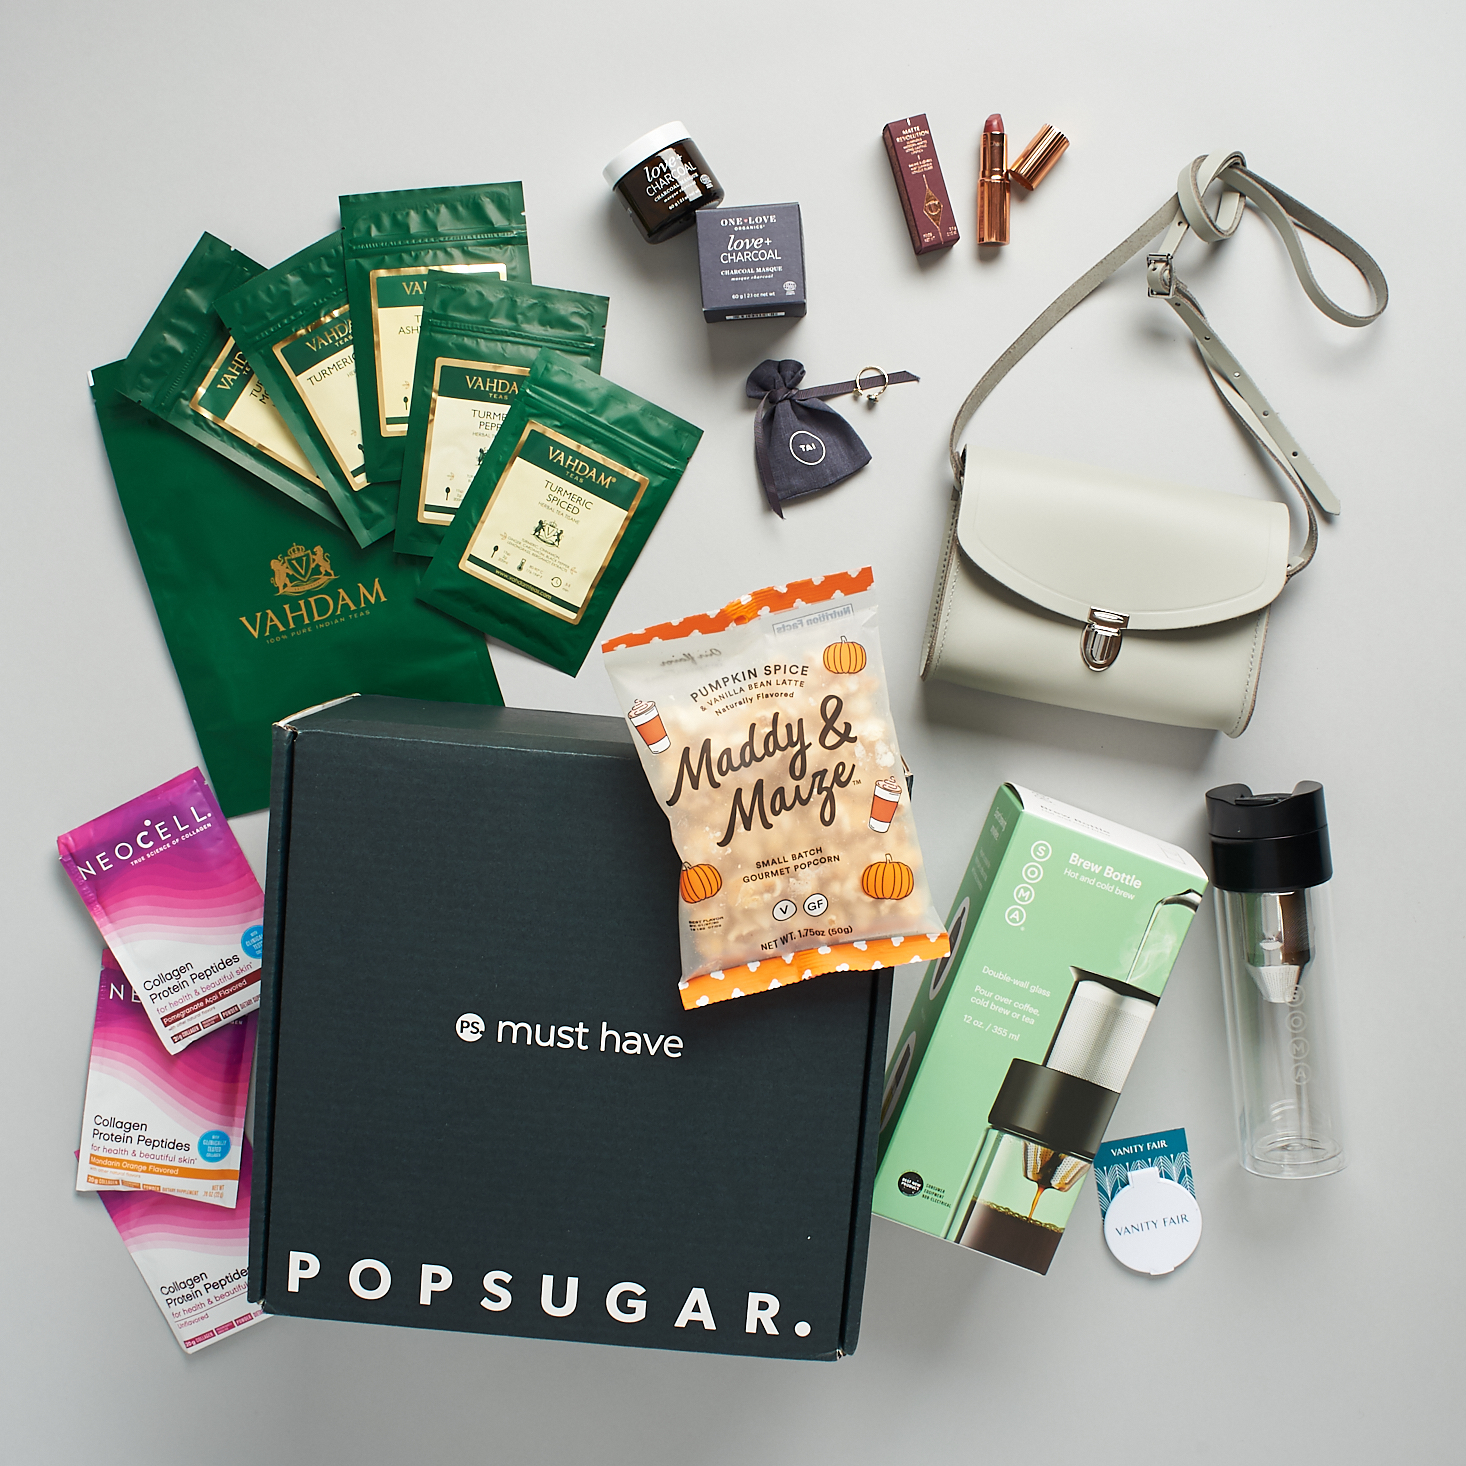 The 16 Best Subscription Box Loyalty Programs & Perks – 2019 Readers’ Choice